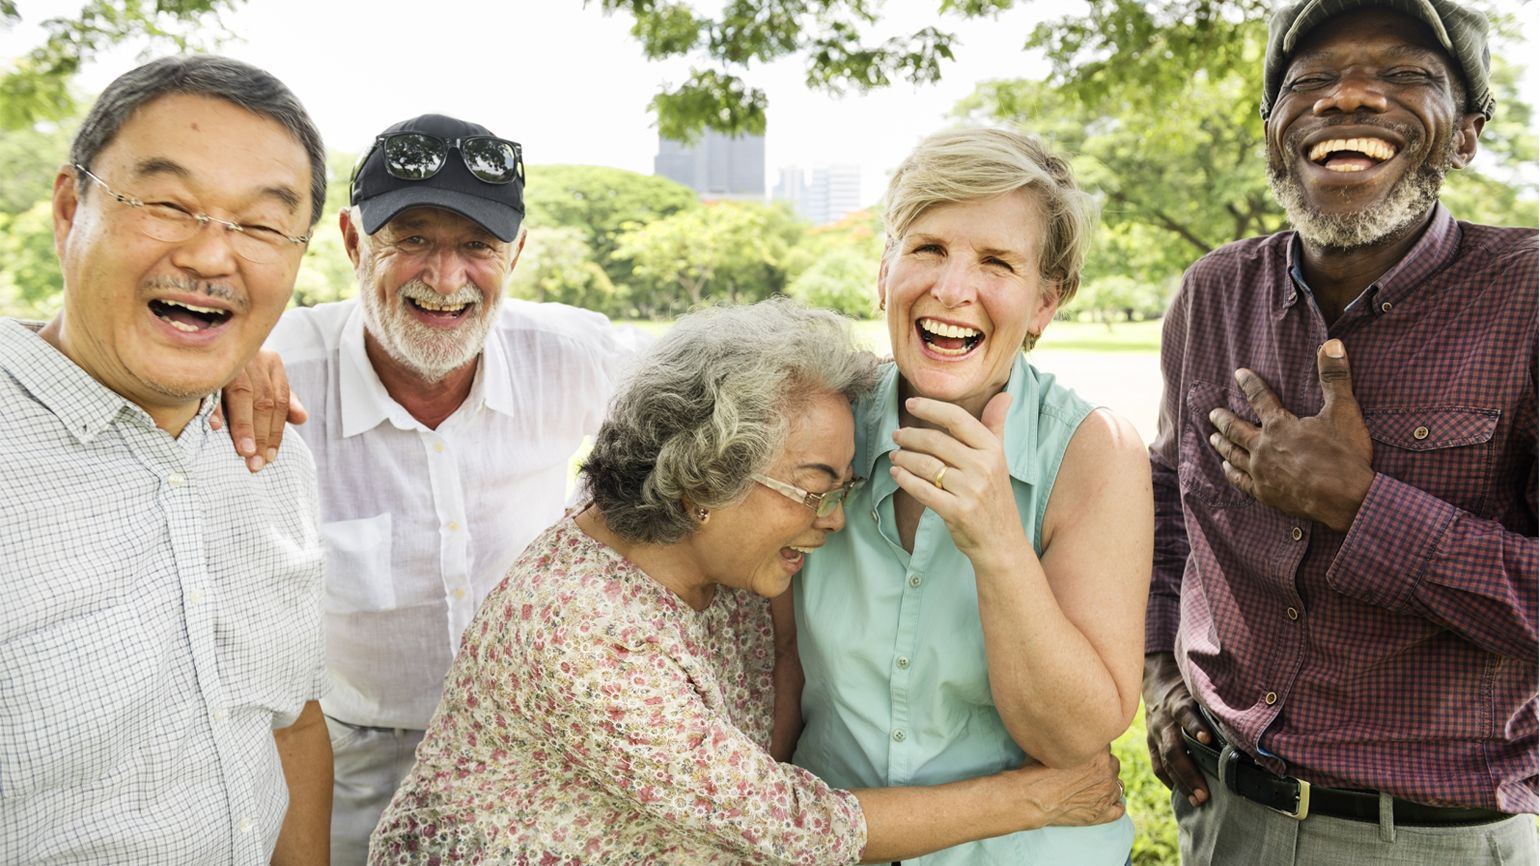 A group of senior citizens share a laugh together